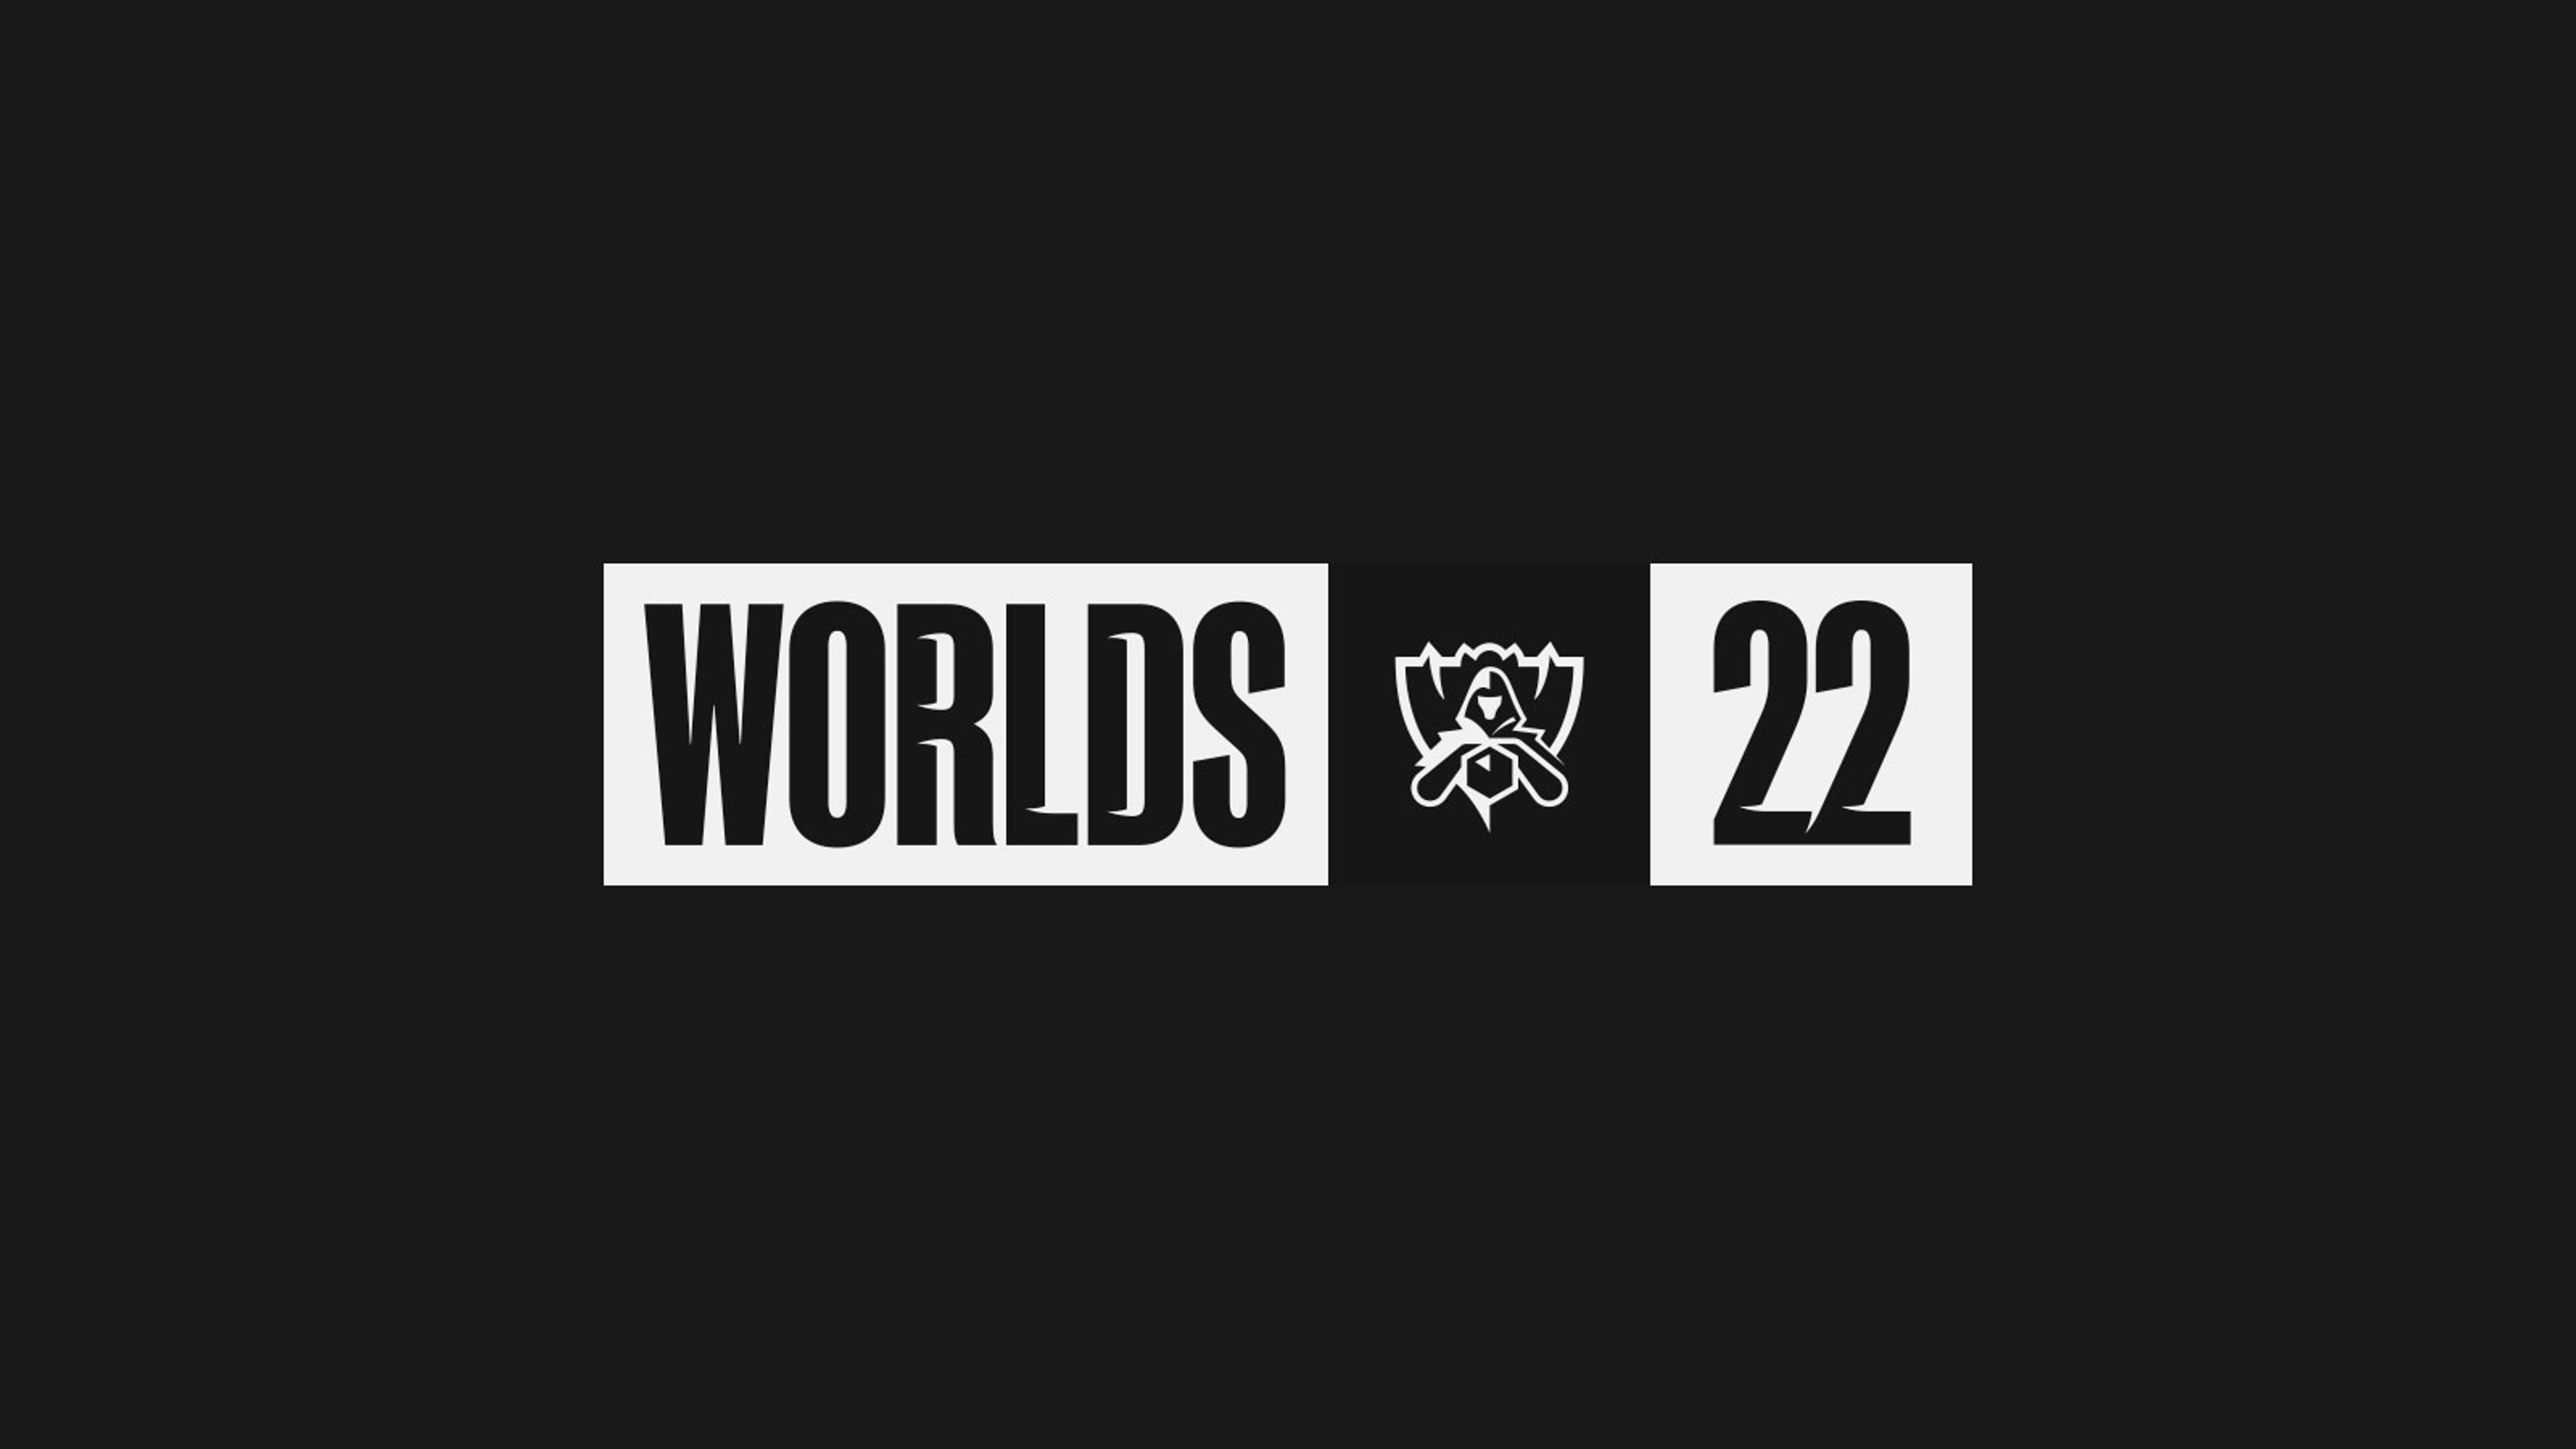 Riot reveals Worlds 2022 ticket sale dates, but are they too late